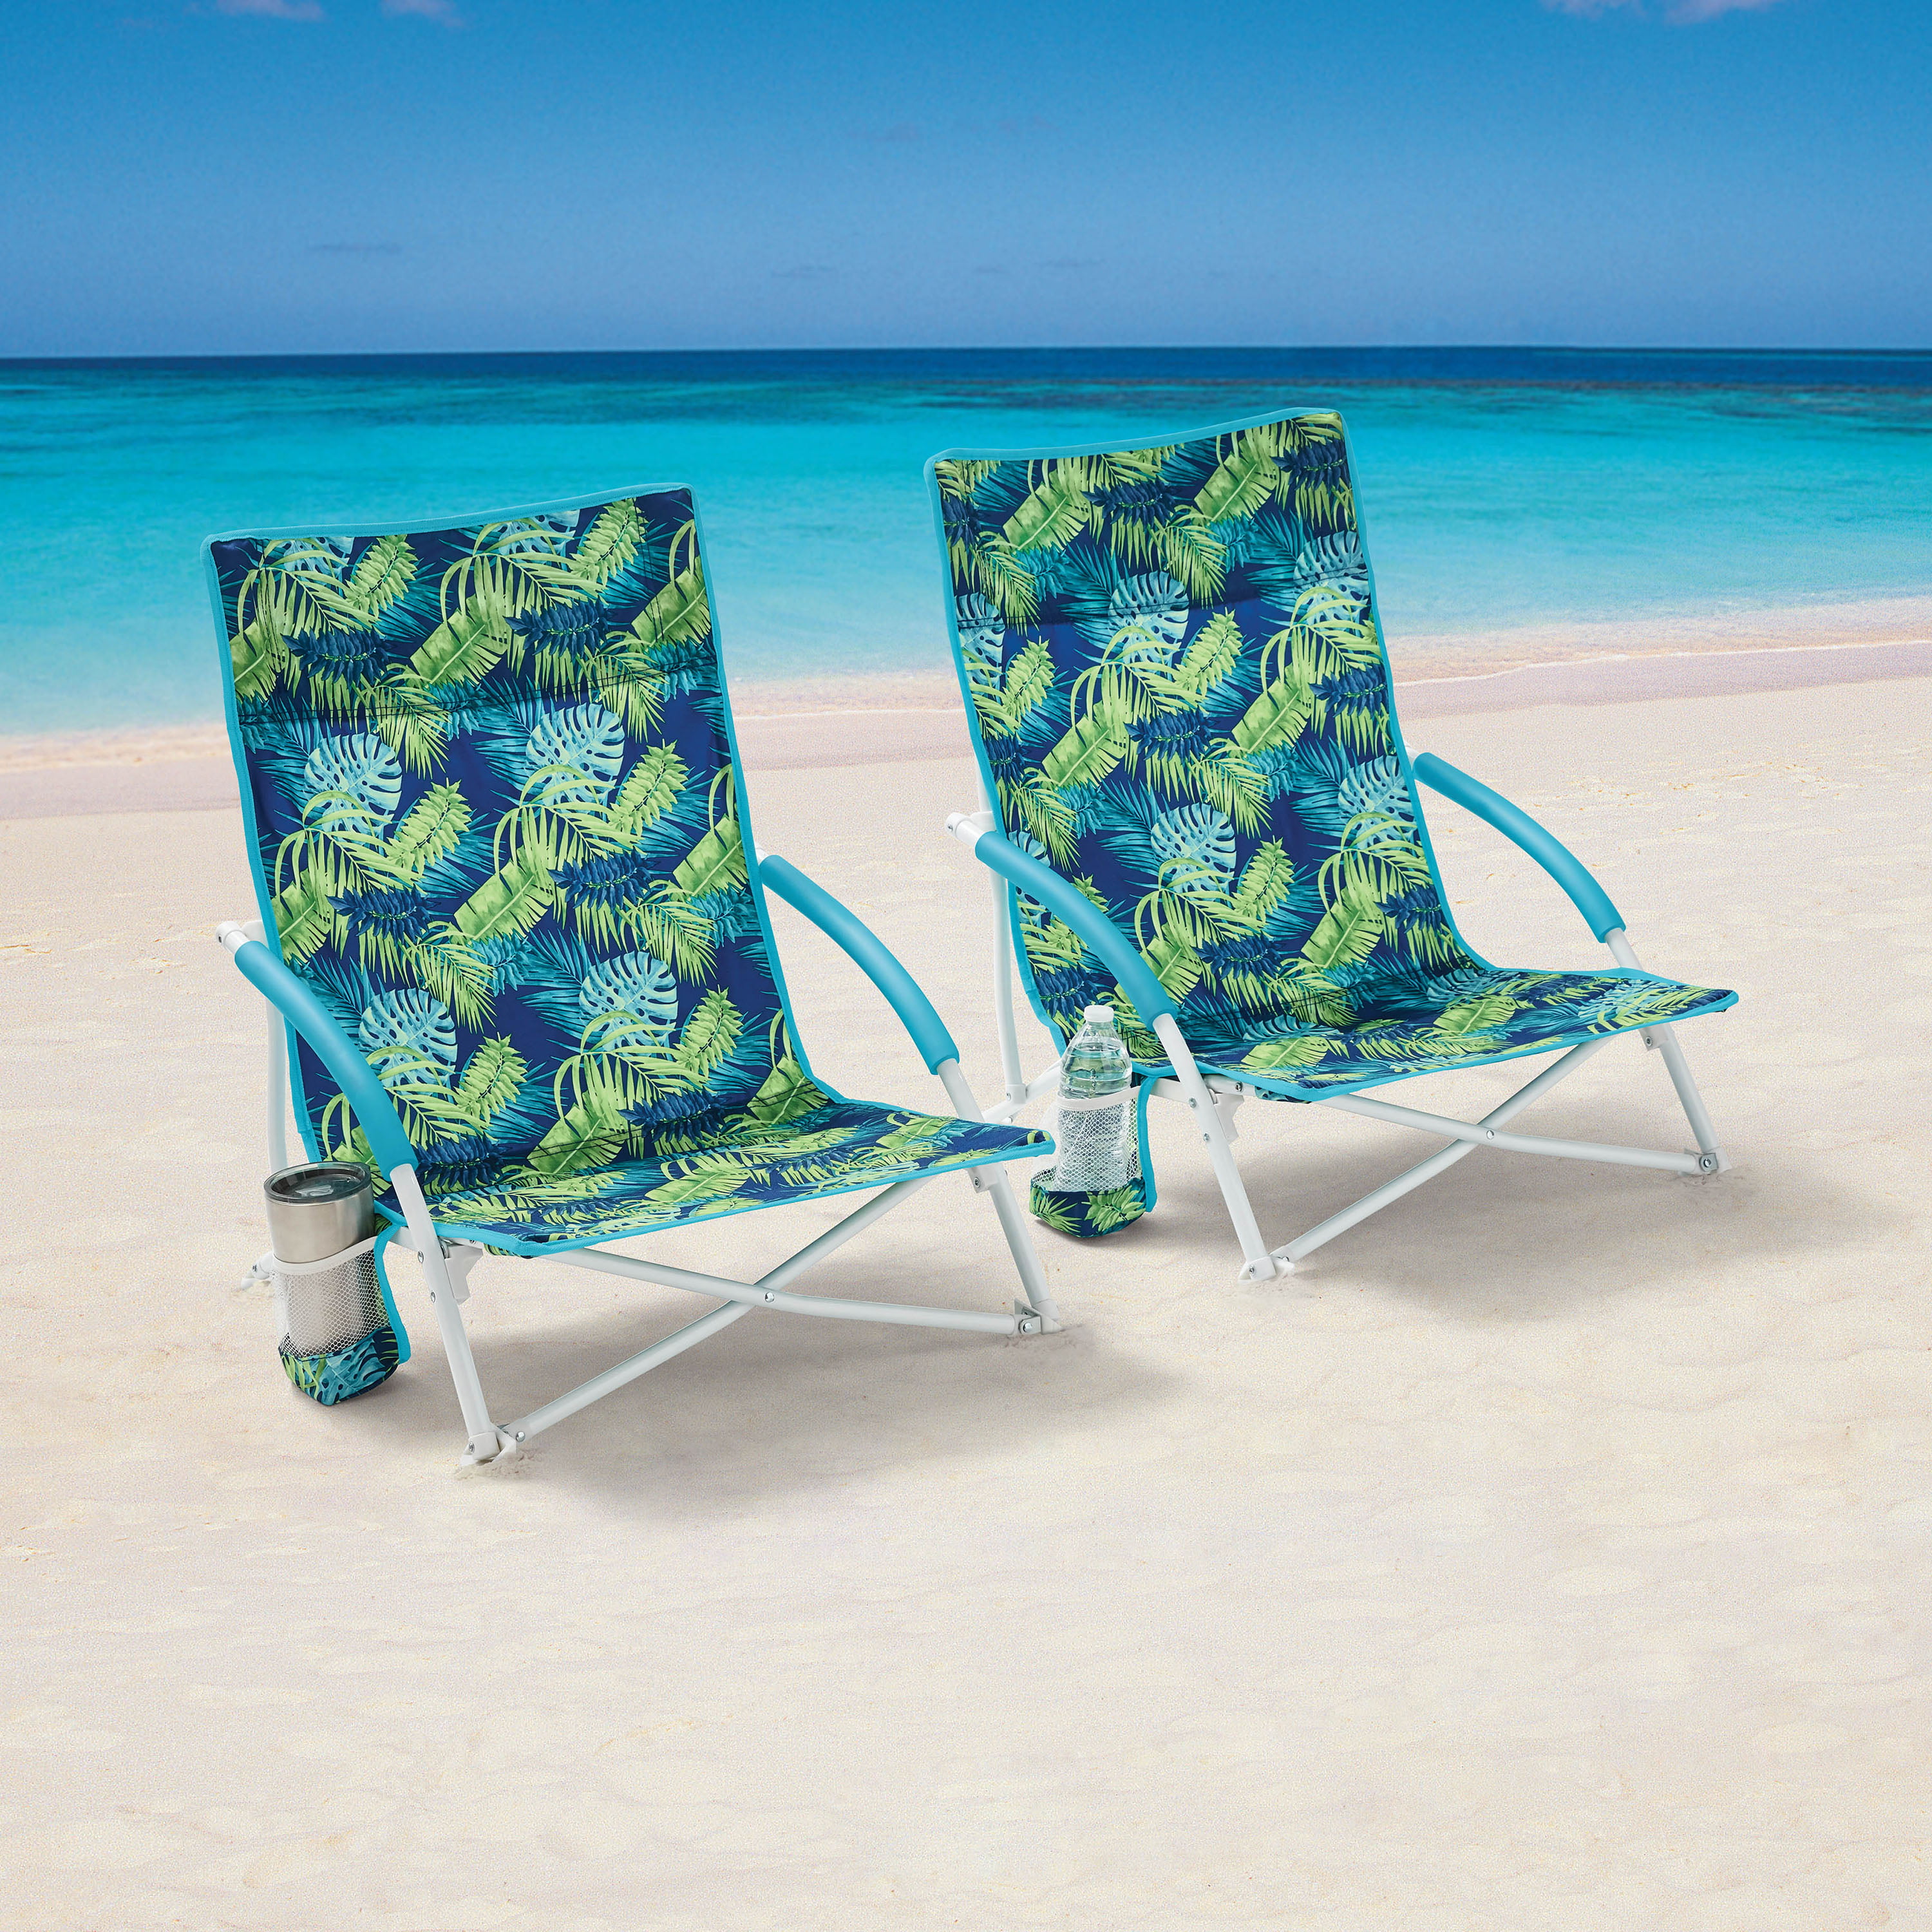 Creatice Beach Lounger Pack Chair for Small Space